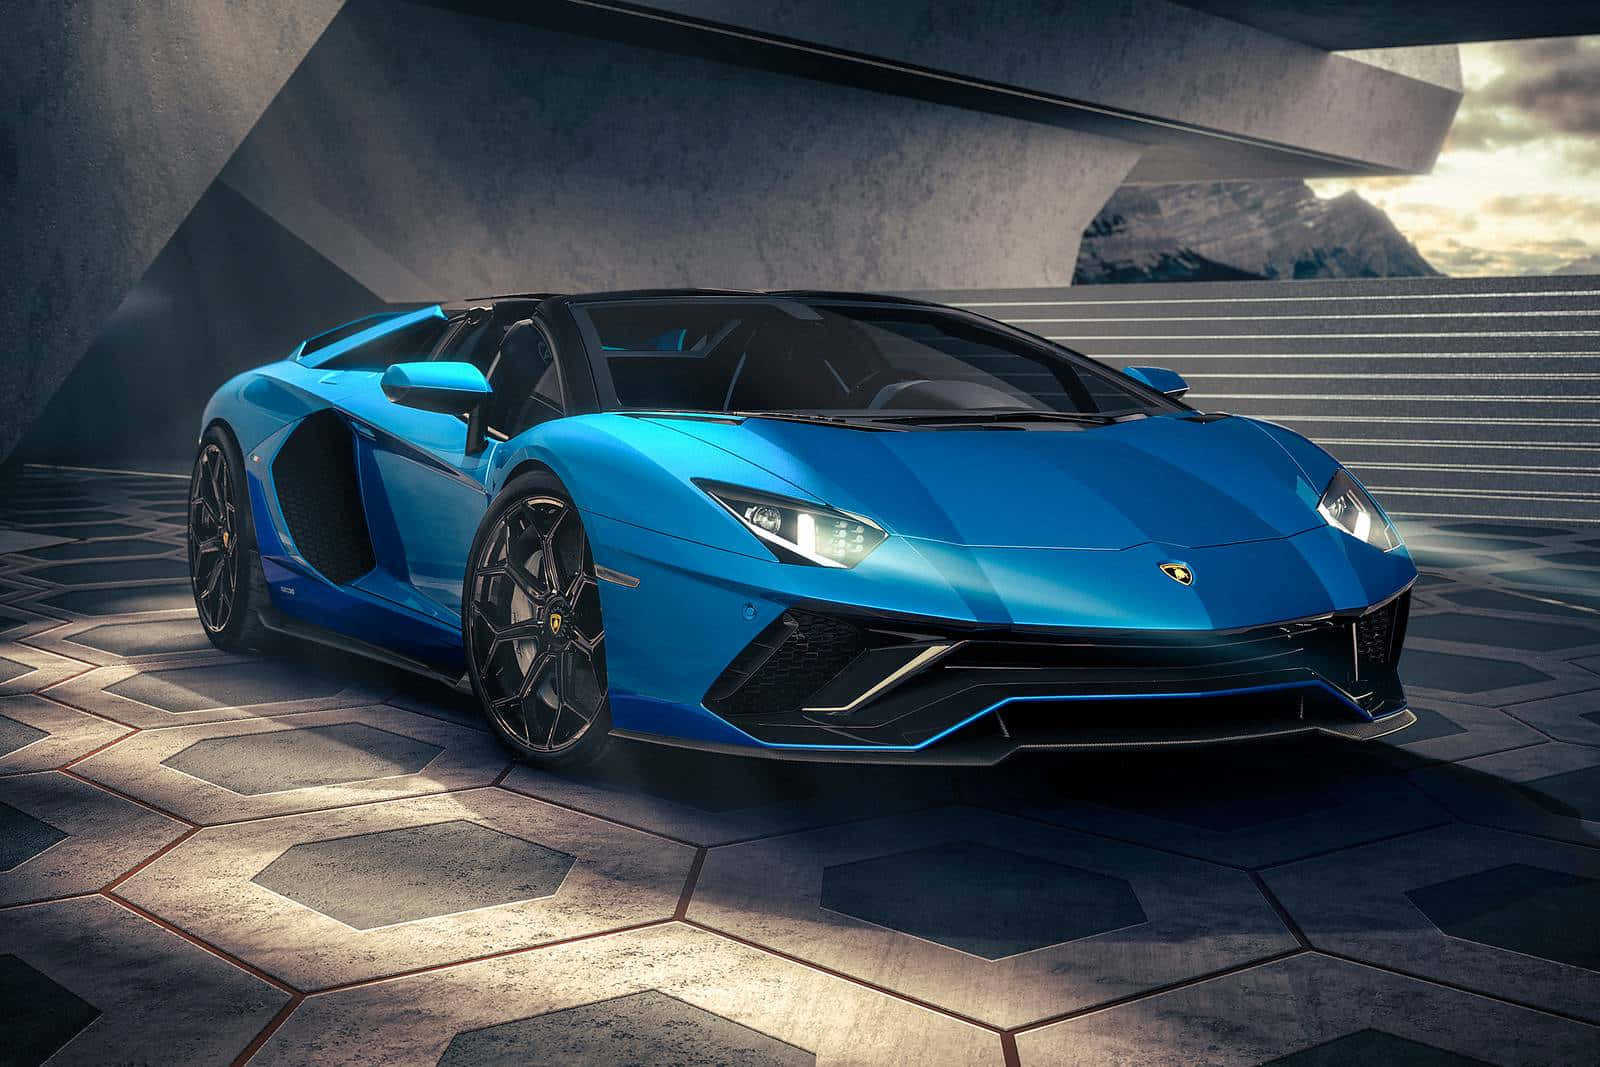 the blue lamborghini huracan is parked in front of a building